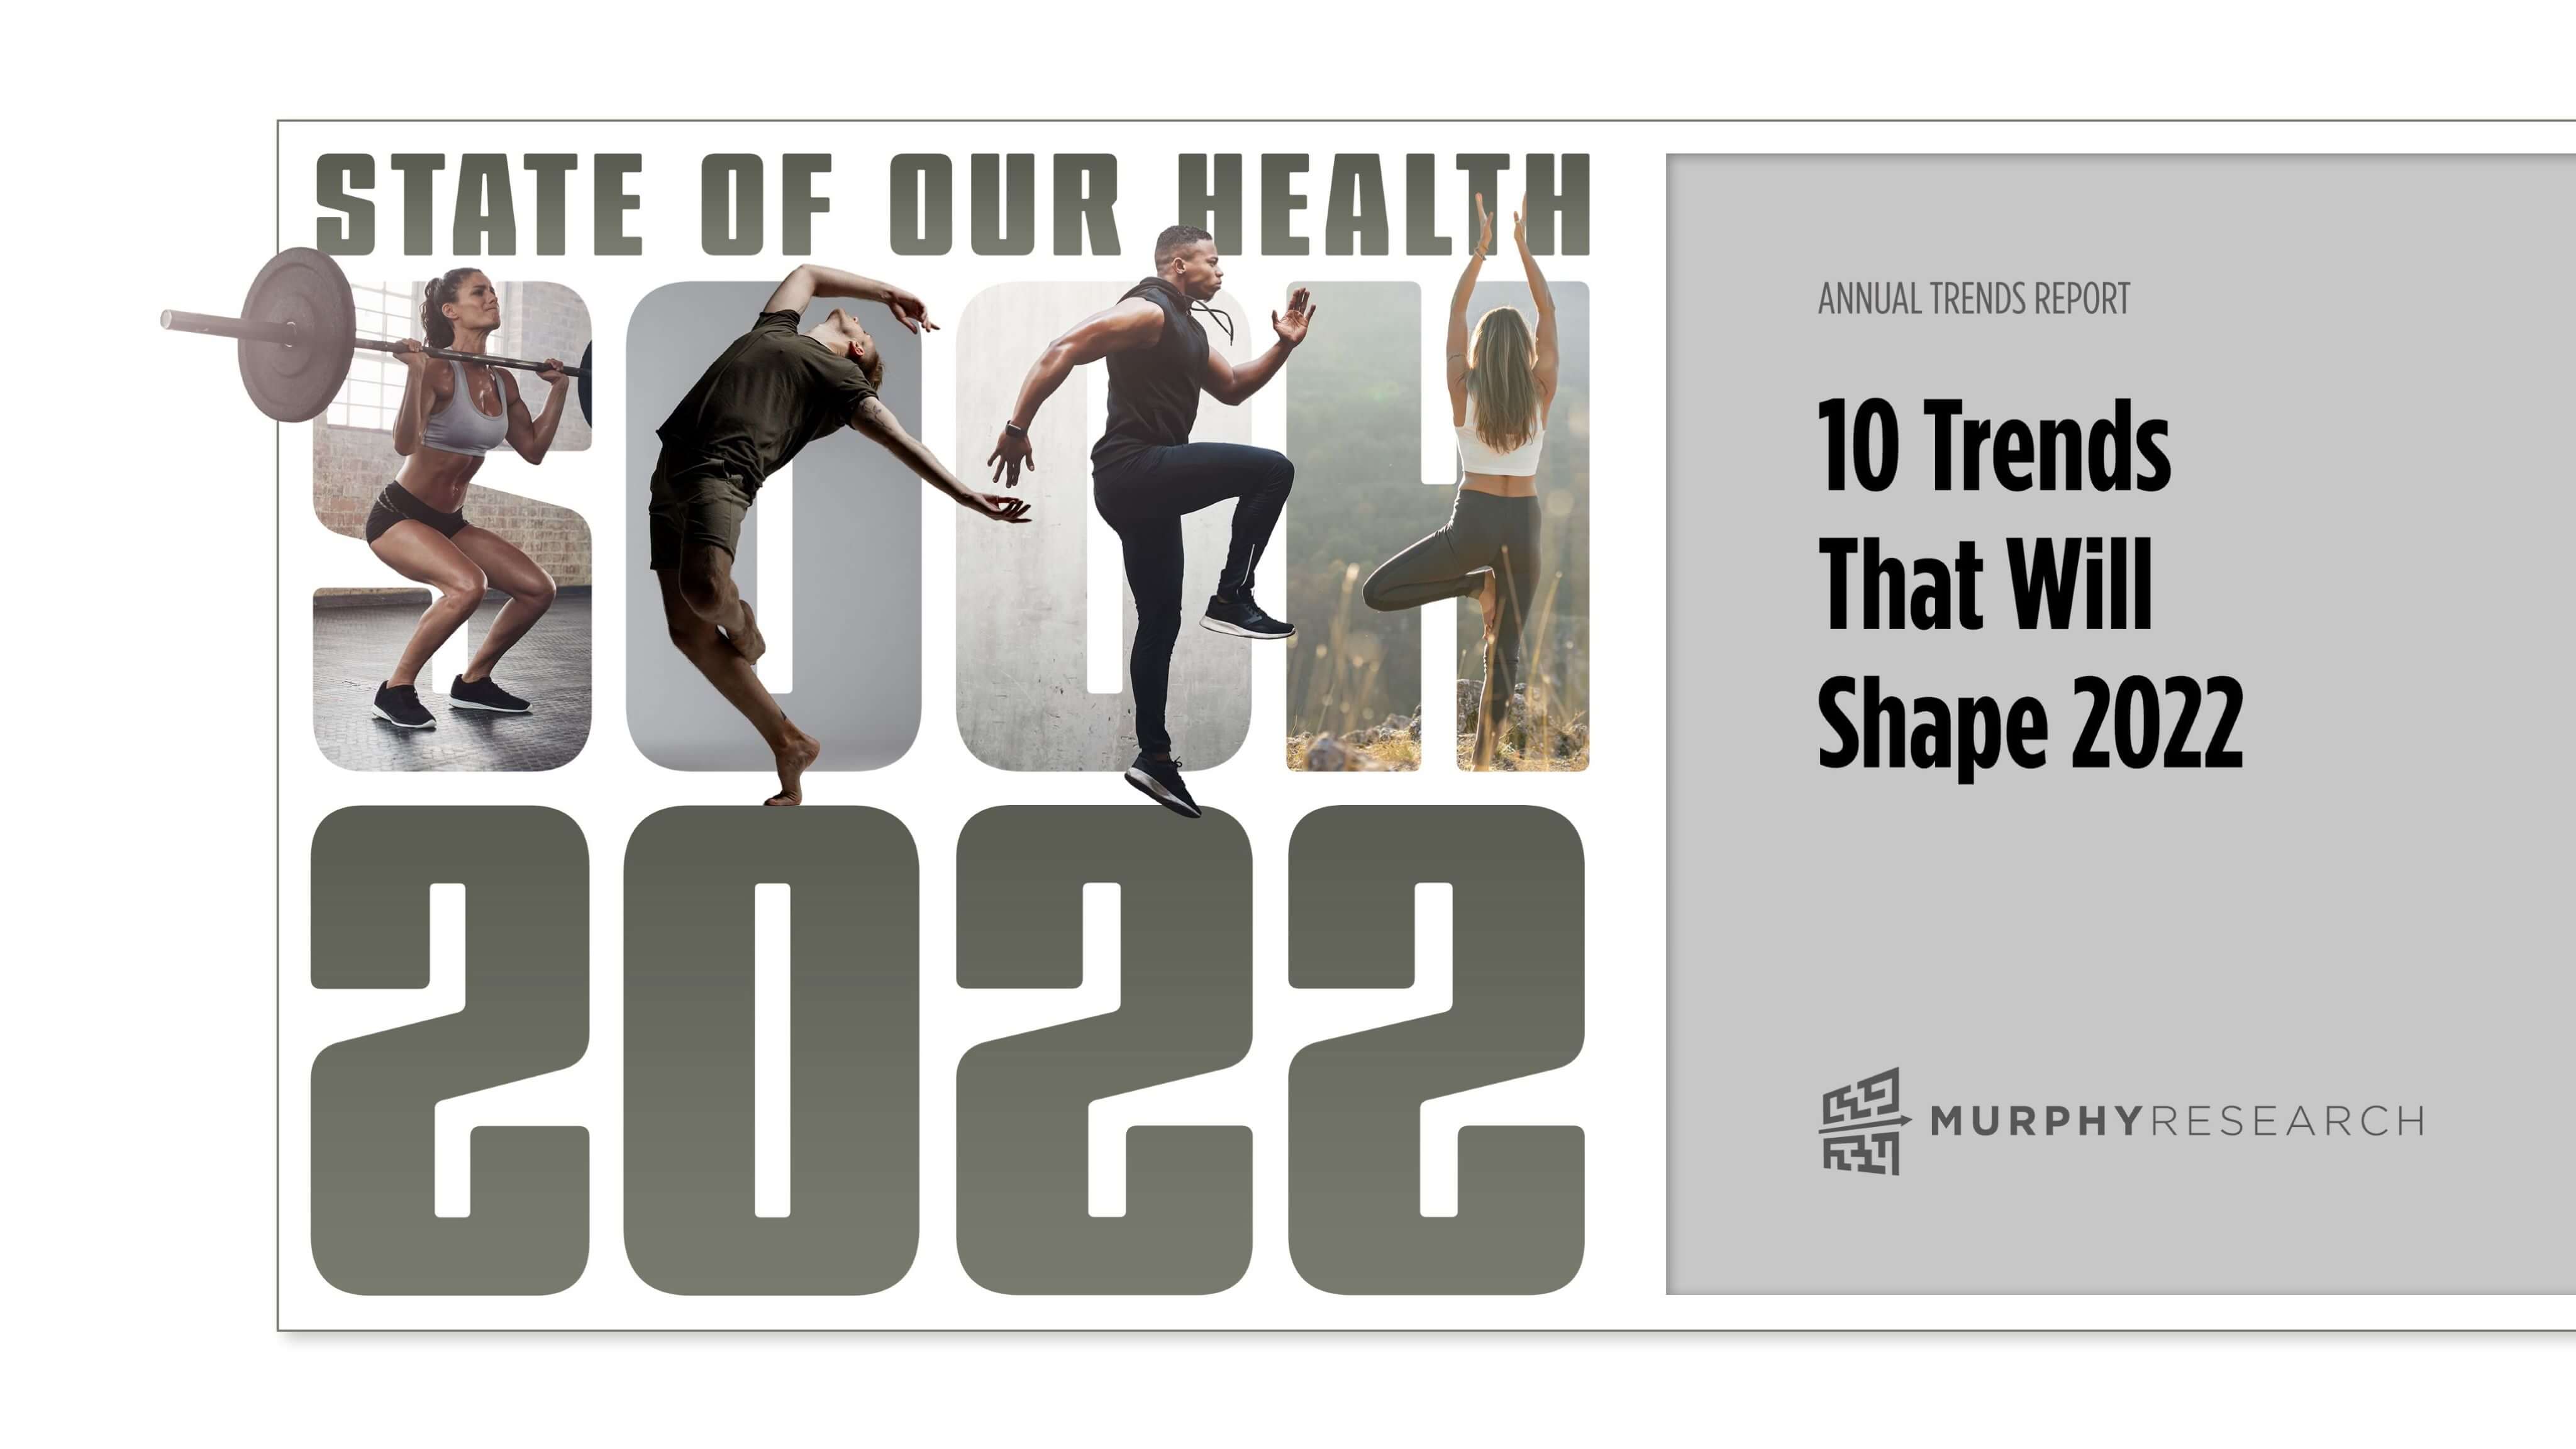 State of Our Health 2022 Annual Trends Report: 10 food, fitness, and mindfulness trends that will shape 2022